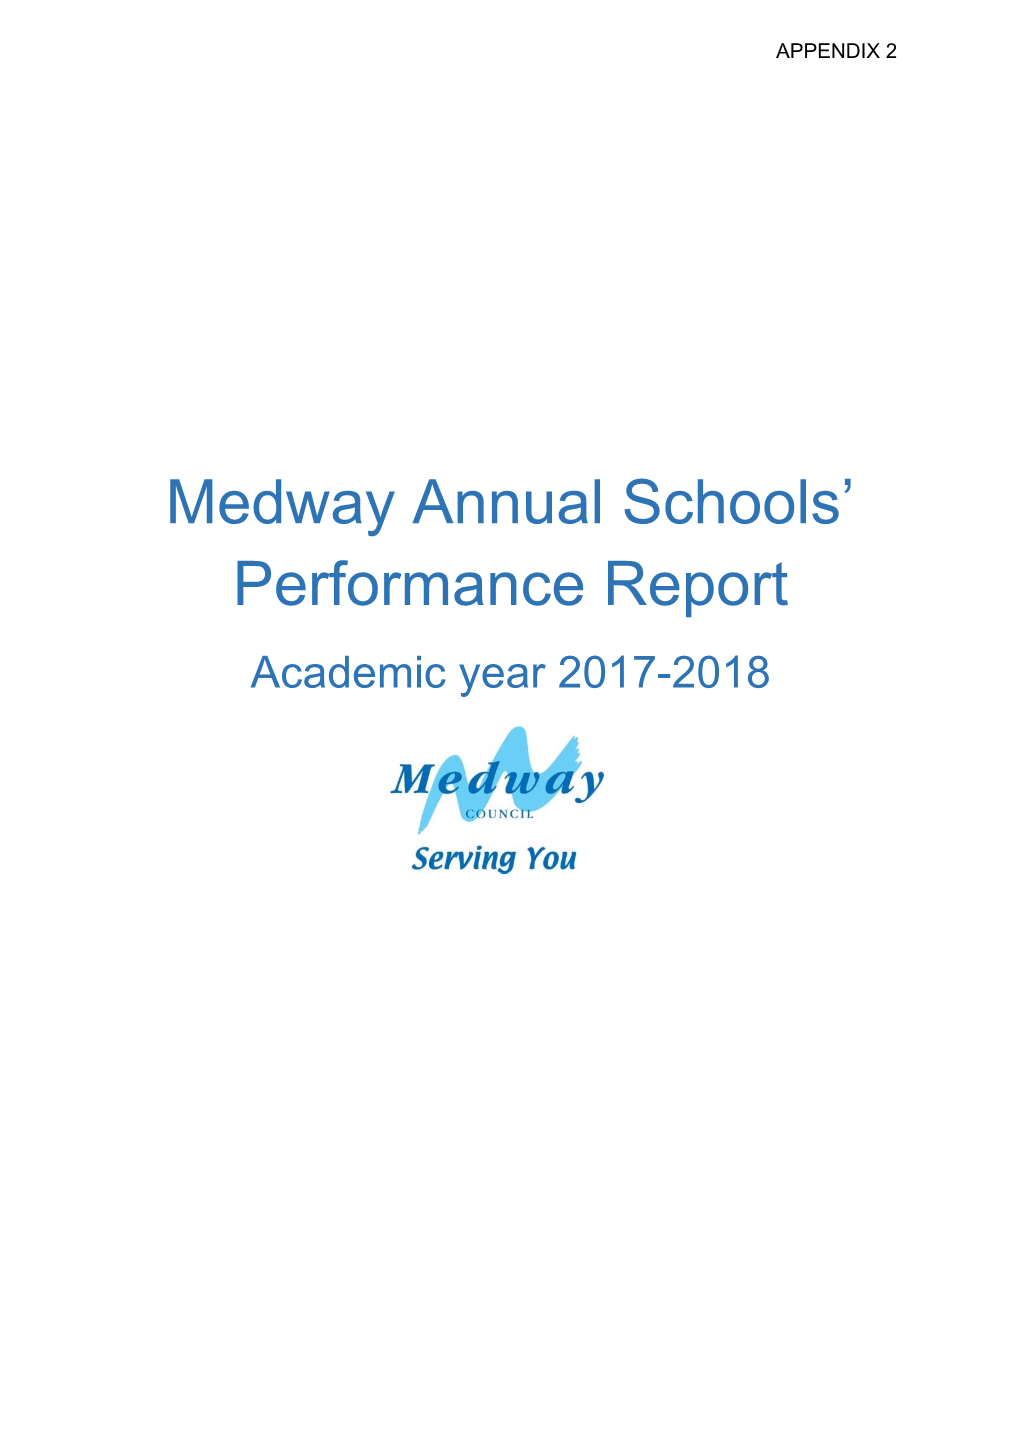 Medway Annual Schools' Performance Report